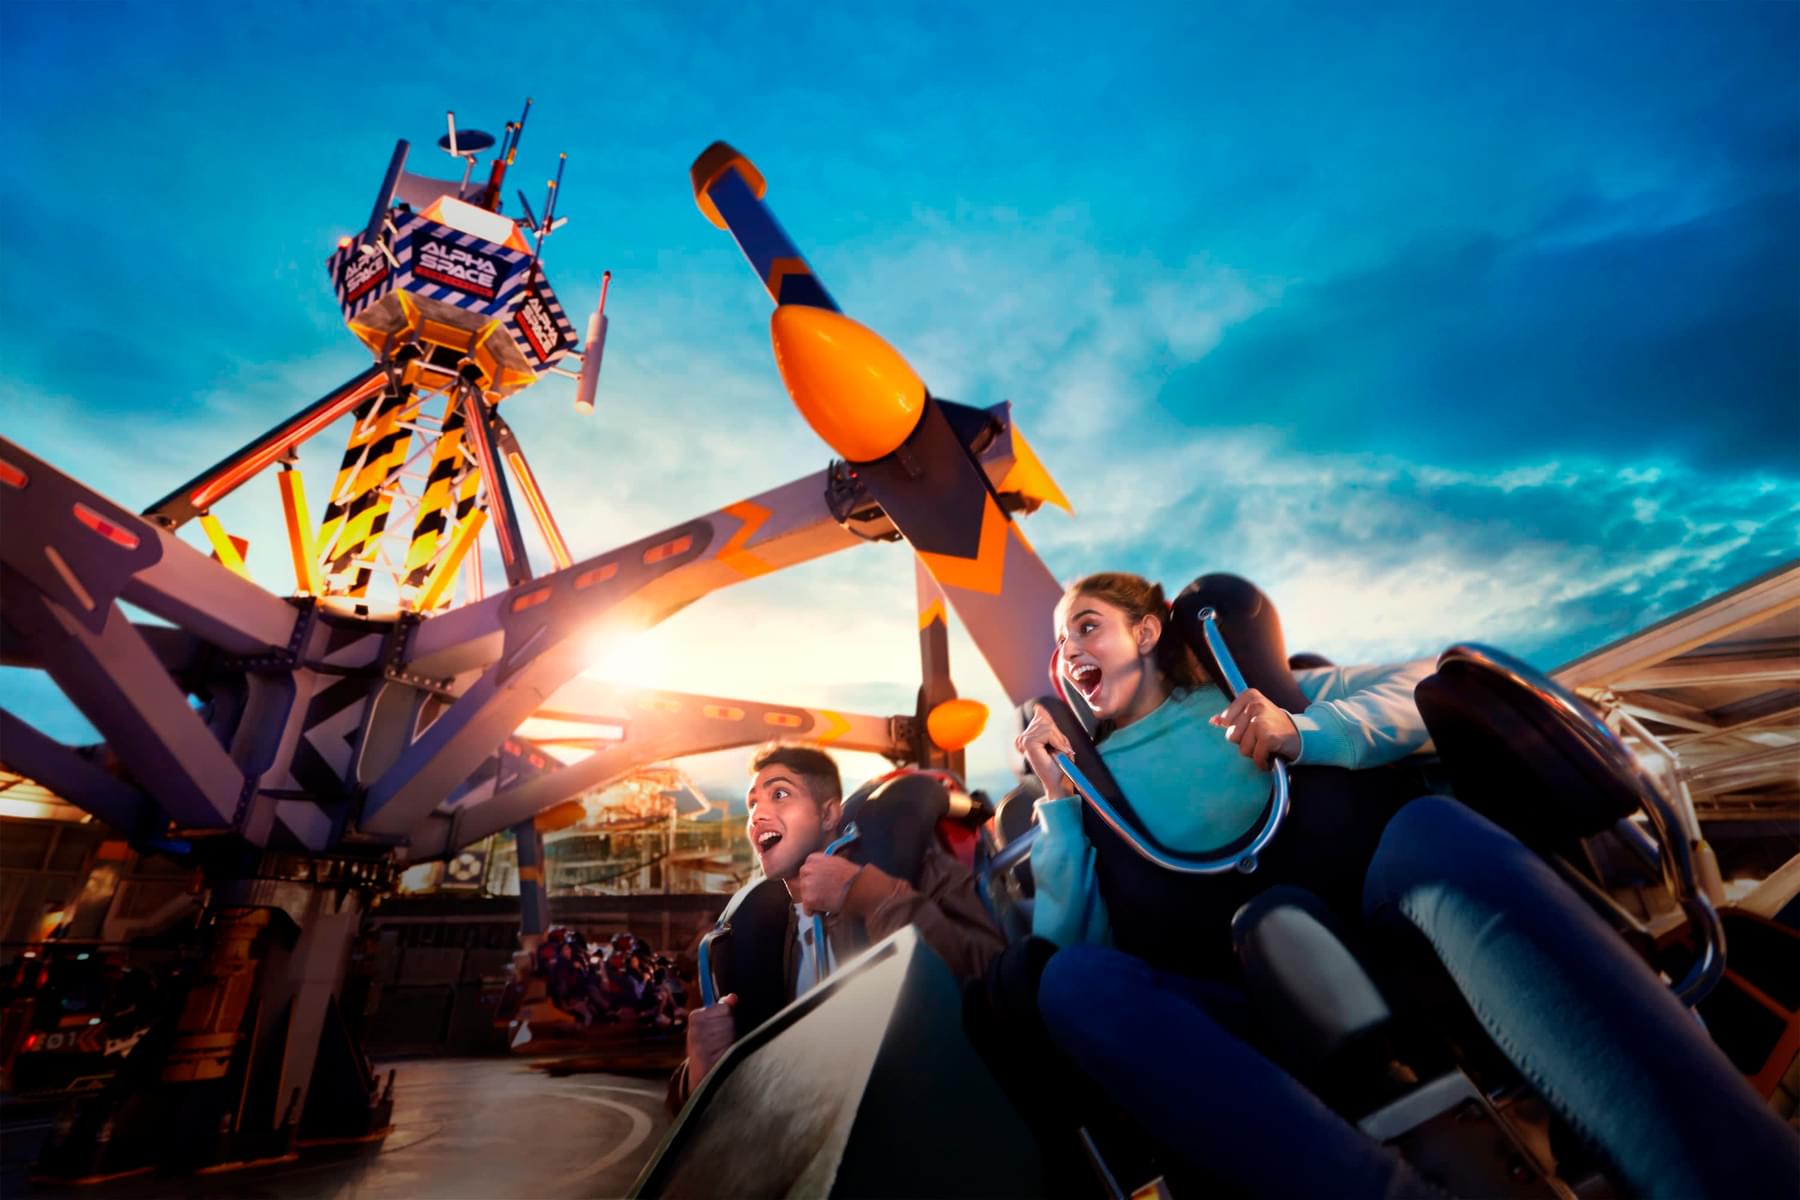 Feel the thrill while enjoying the rides